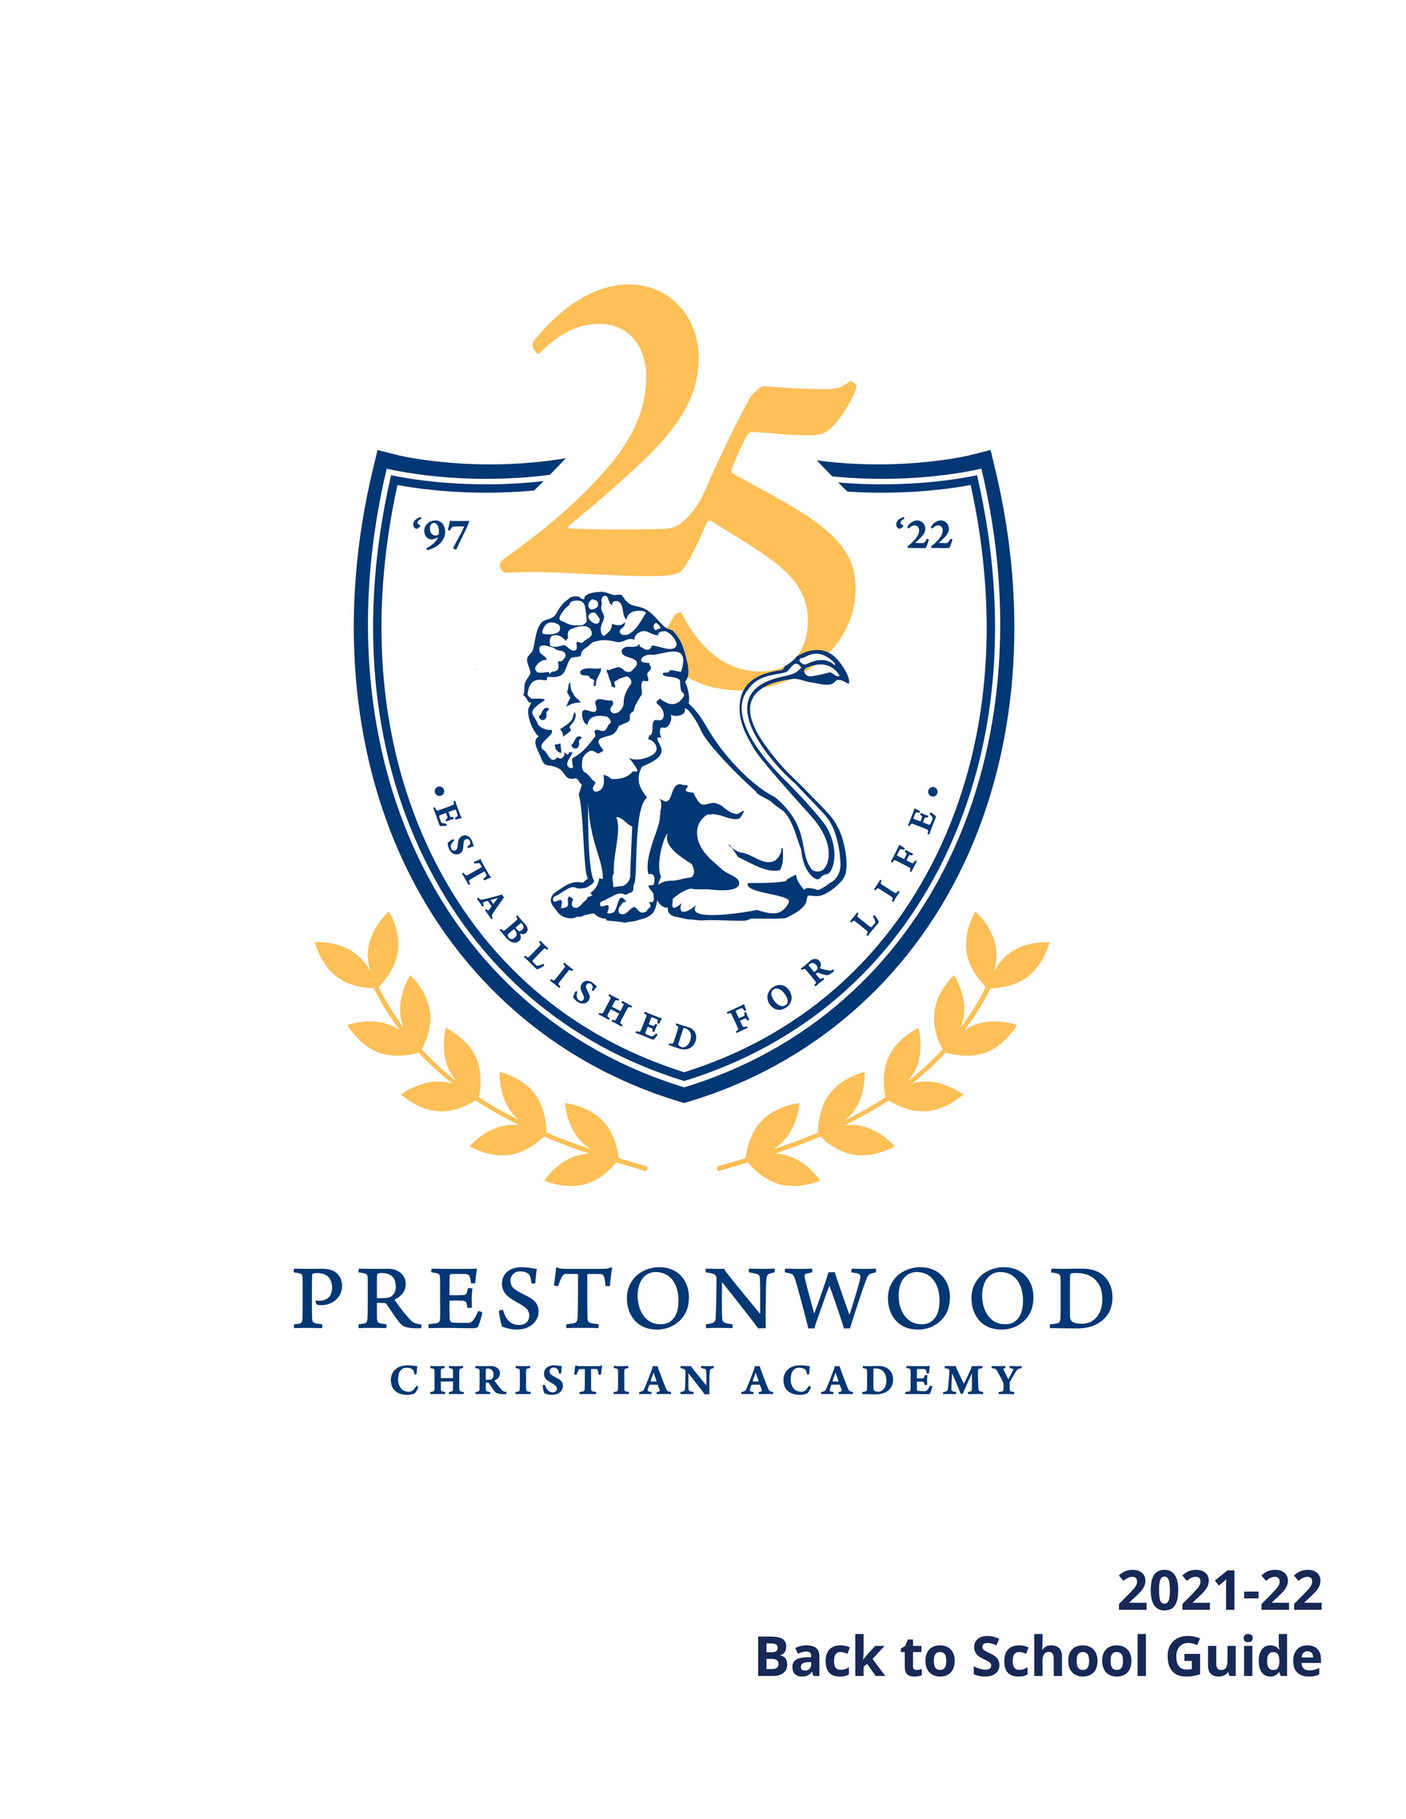 prestonwood-christian-academy-back-to-school-guide-2021-22-page-1